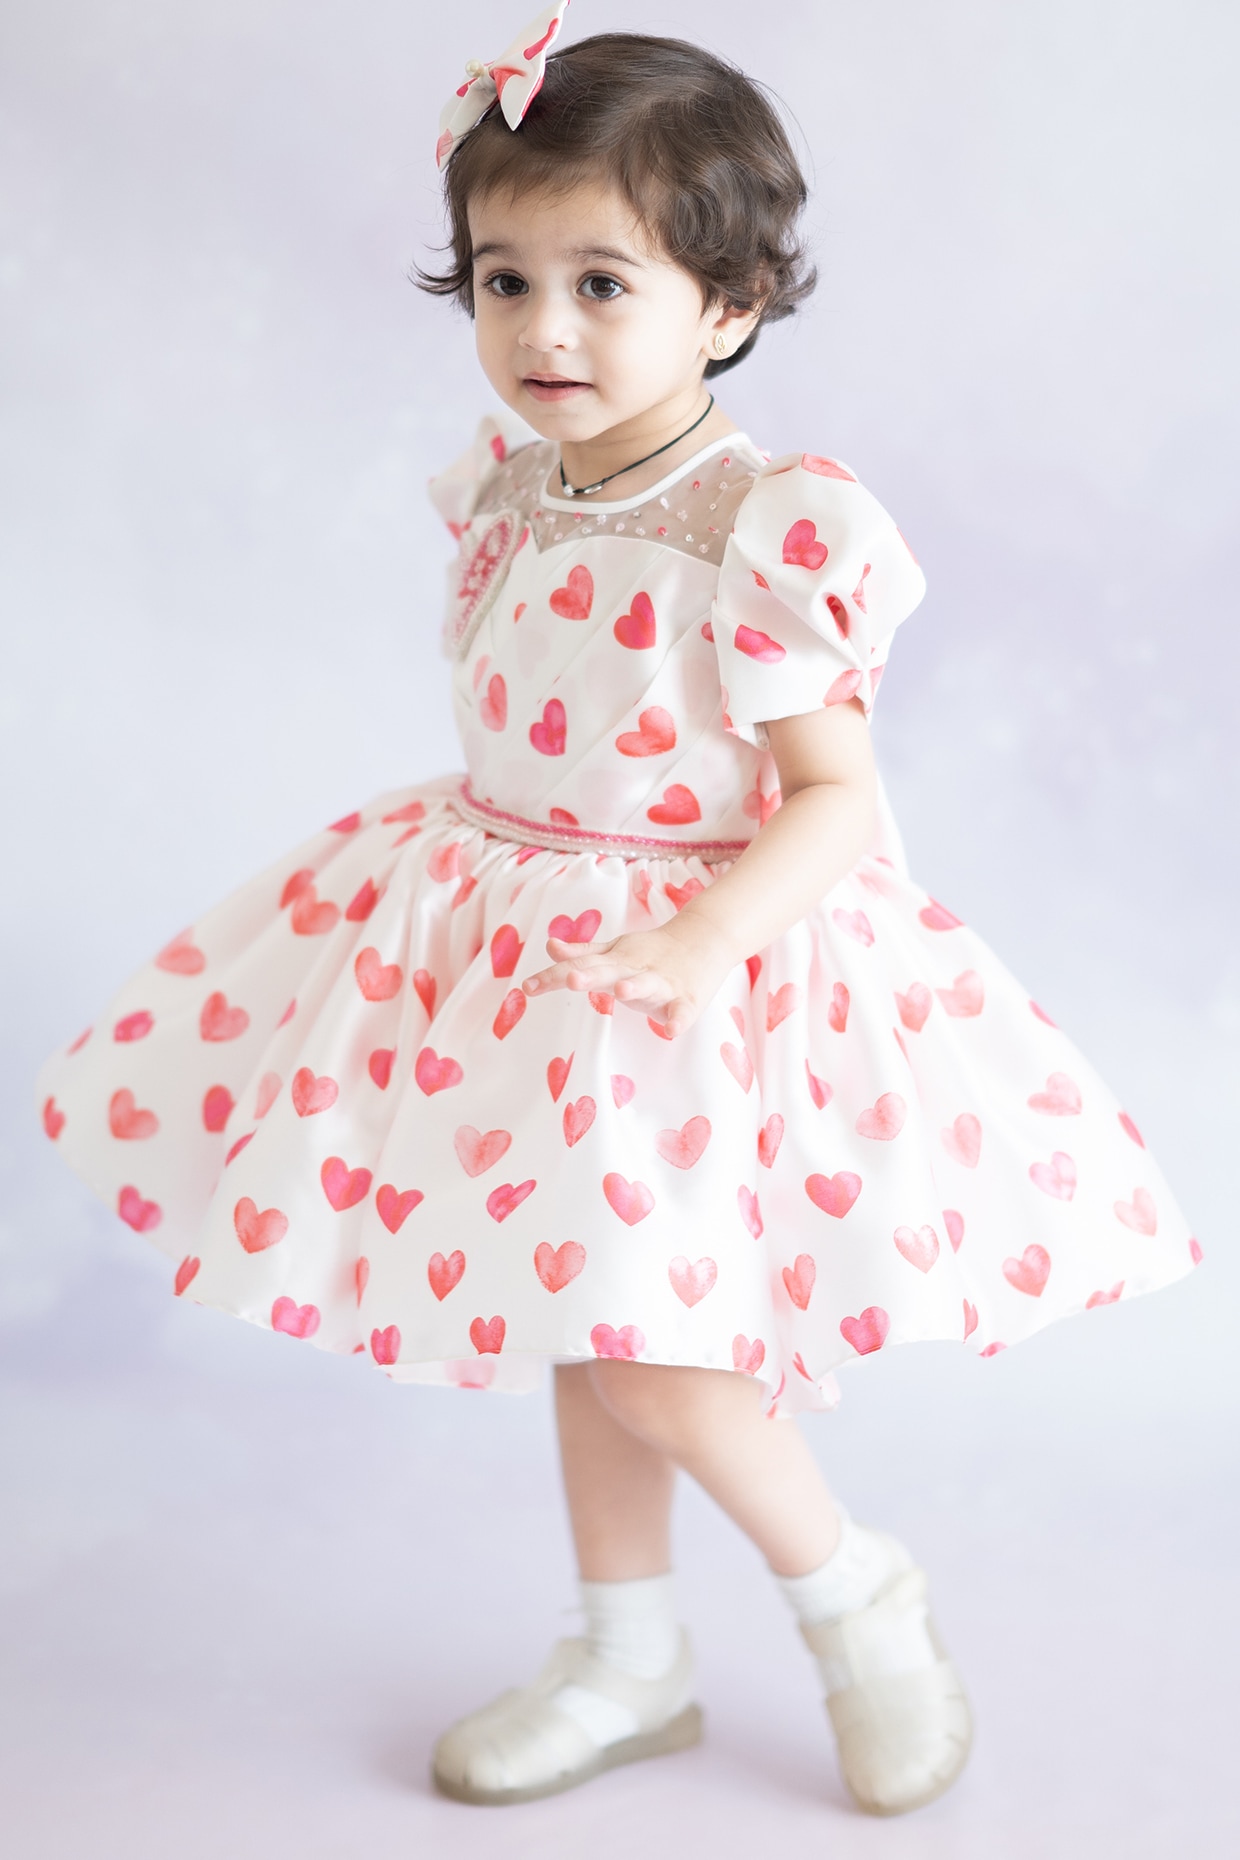 Shop Best Gift For 2 Years Old Baby Girl Dress online | Lazada.com.ph